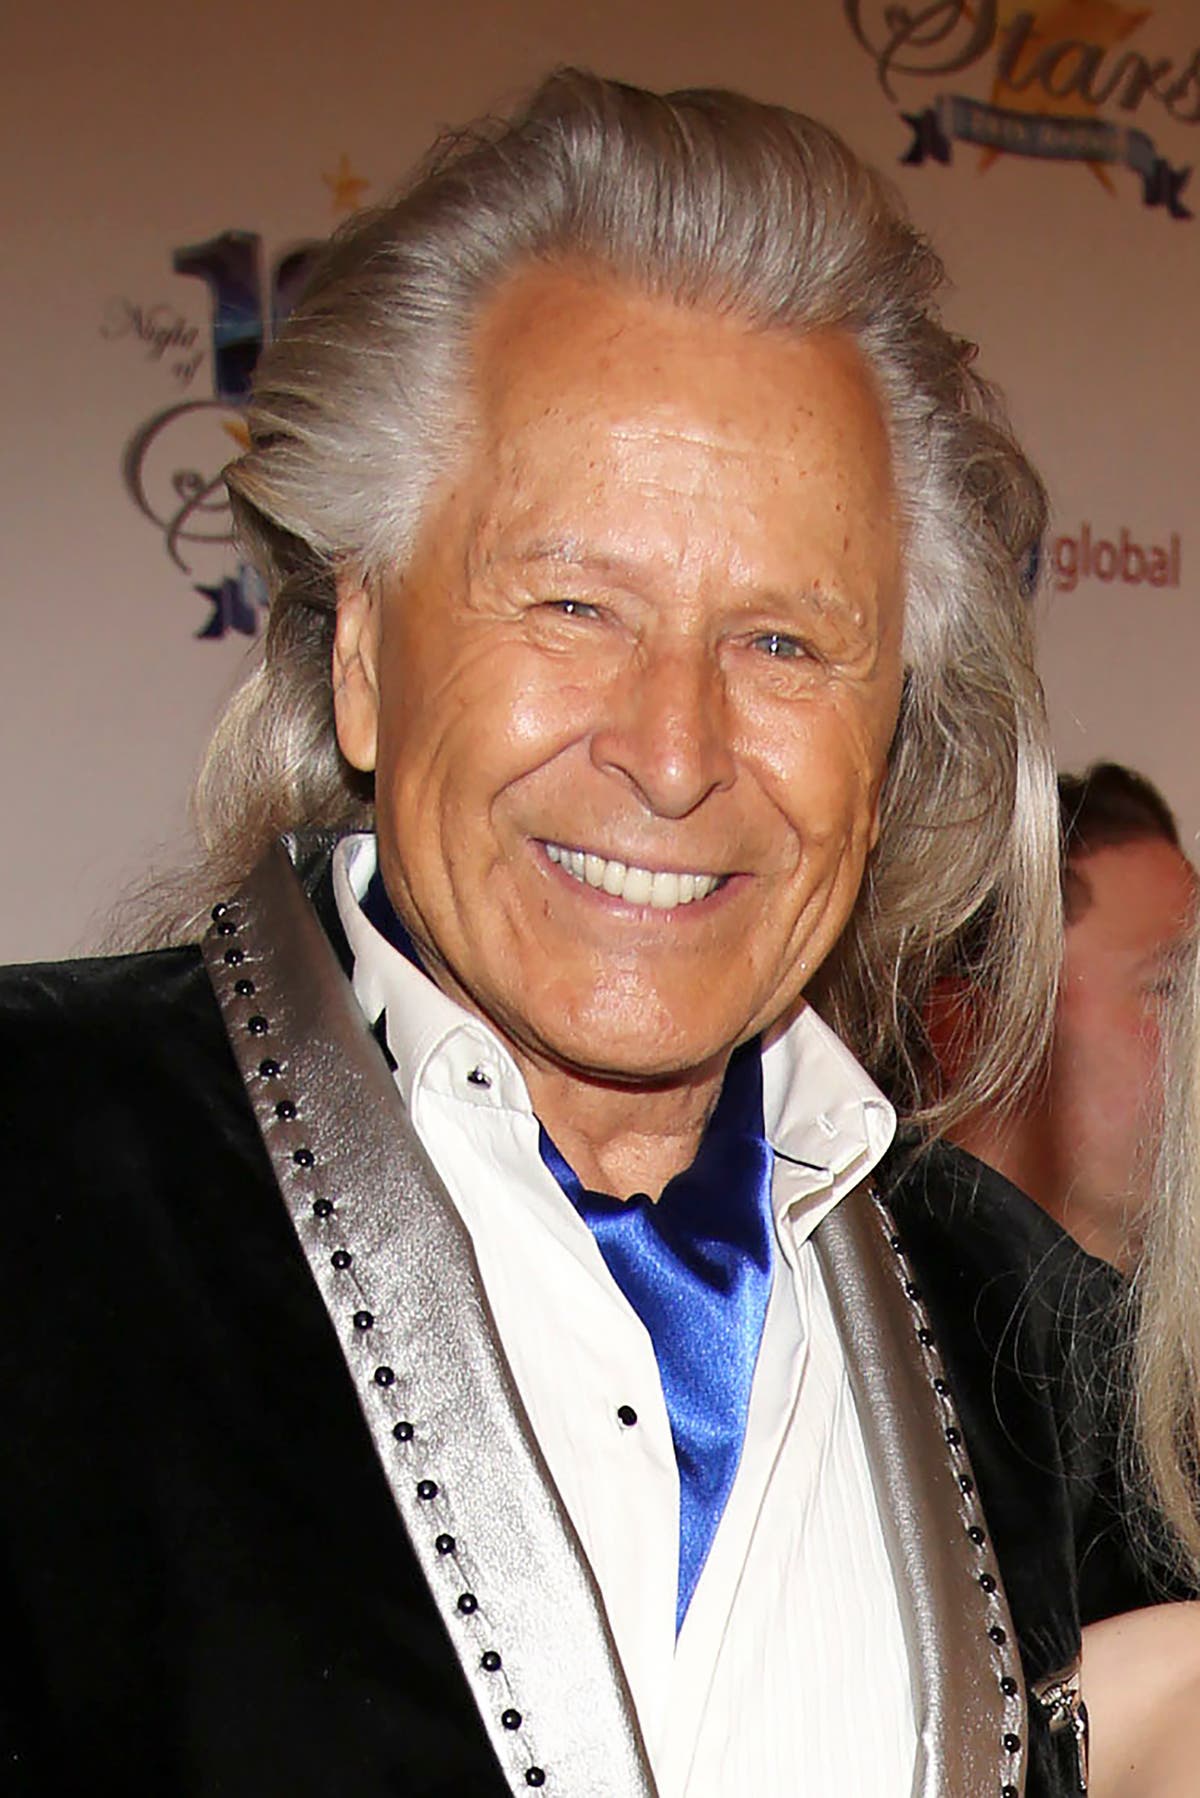 Peter Nygard consents to being committed for extradition to U.S. 